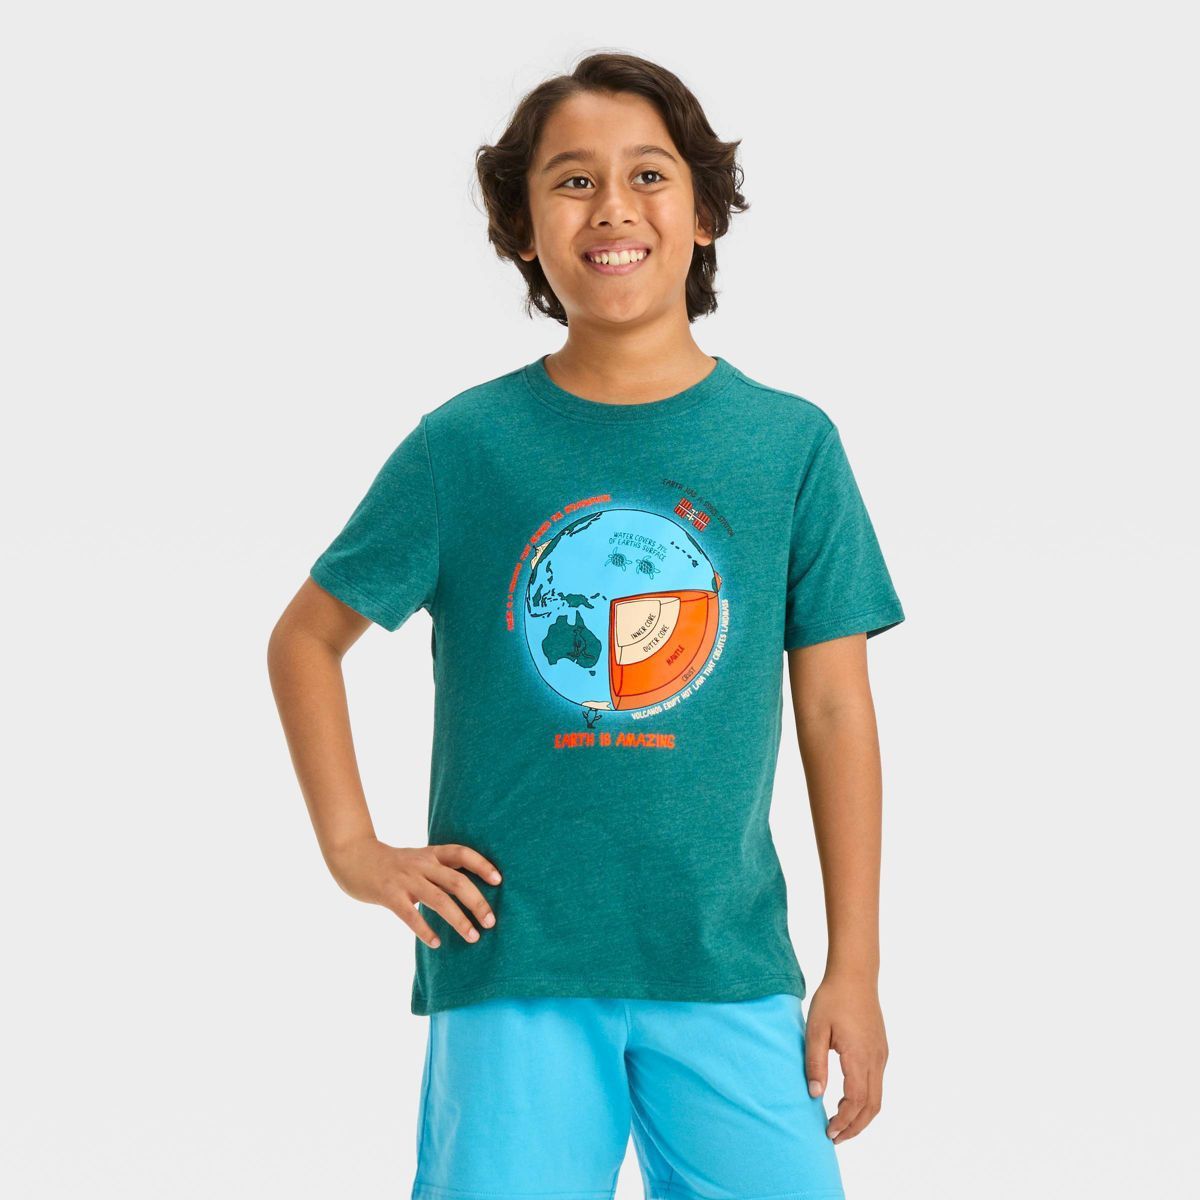 Boys' Short Sleeve 'Earth is Amazing' Graphic T-Shirt - Cat & Jack™ Dark Teal Green | Target